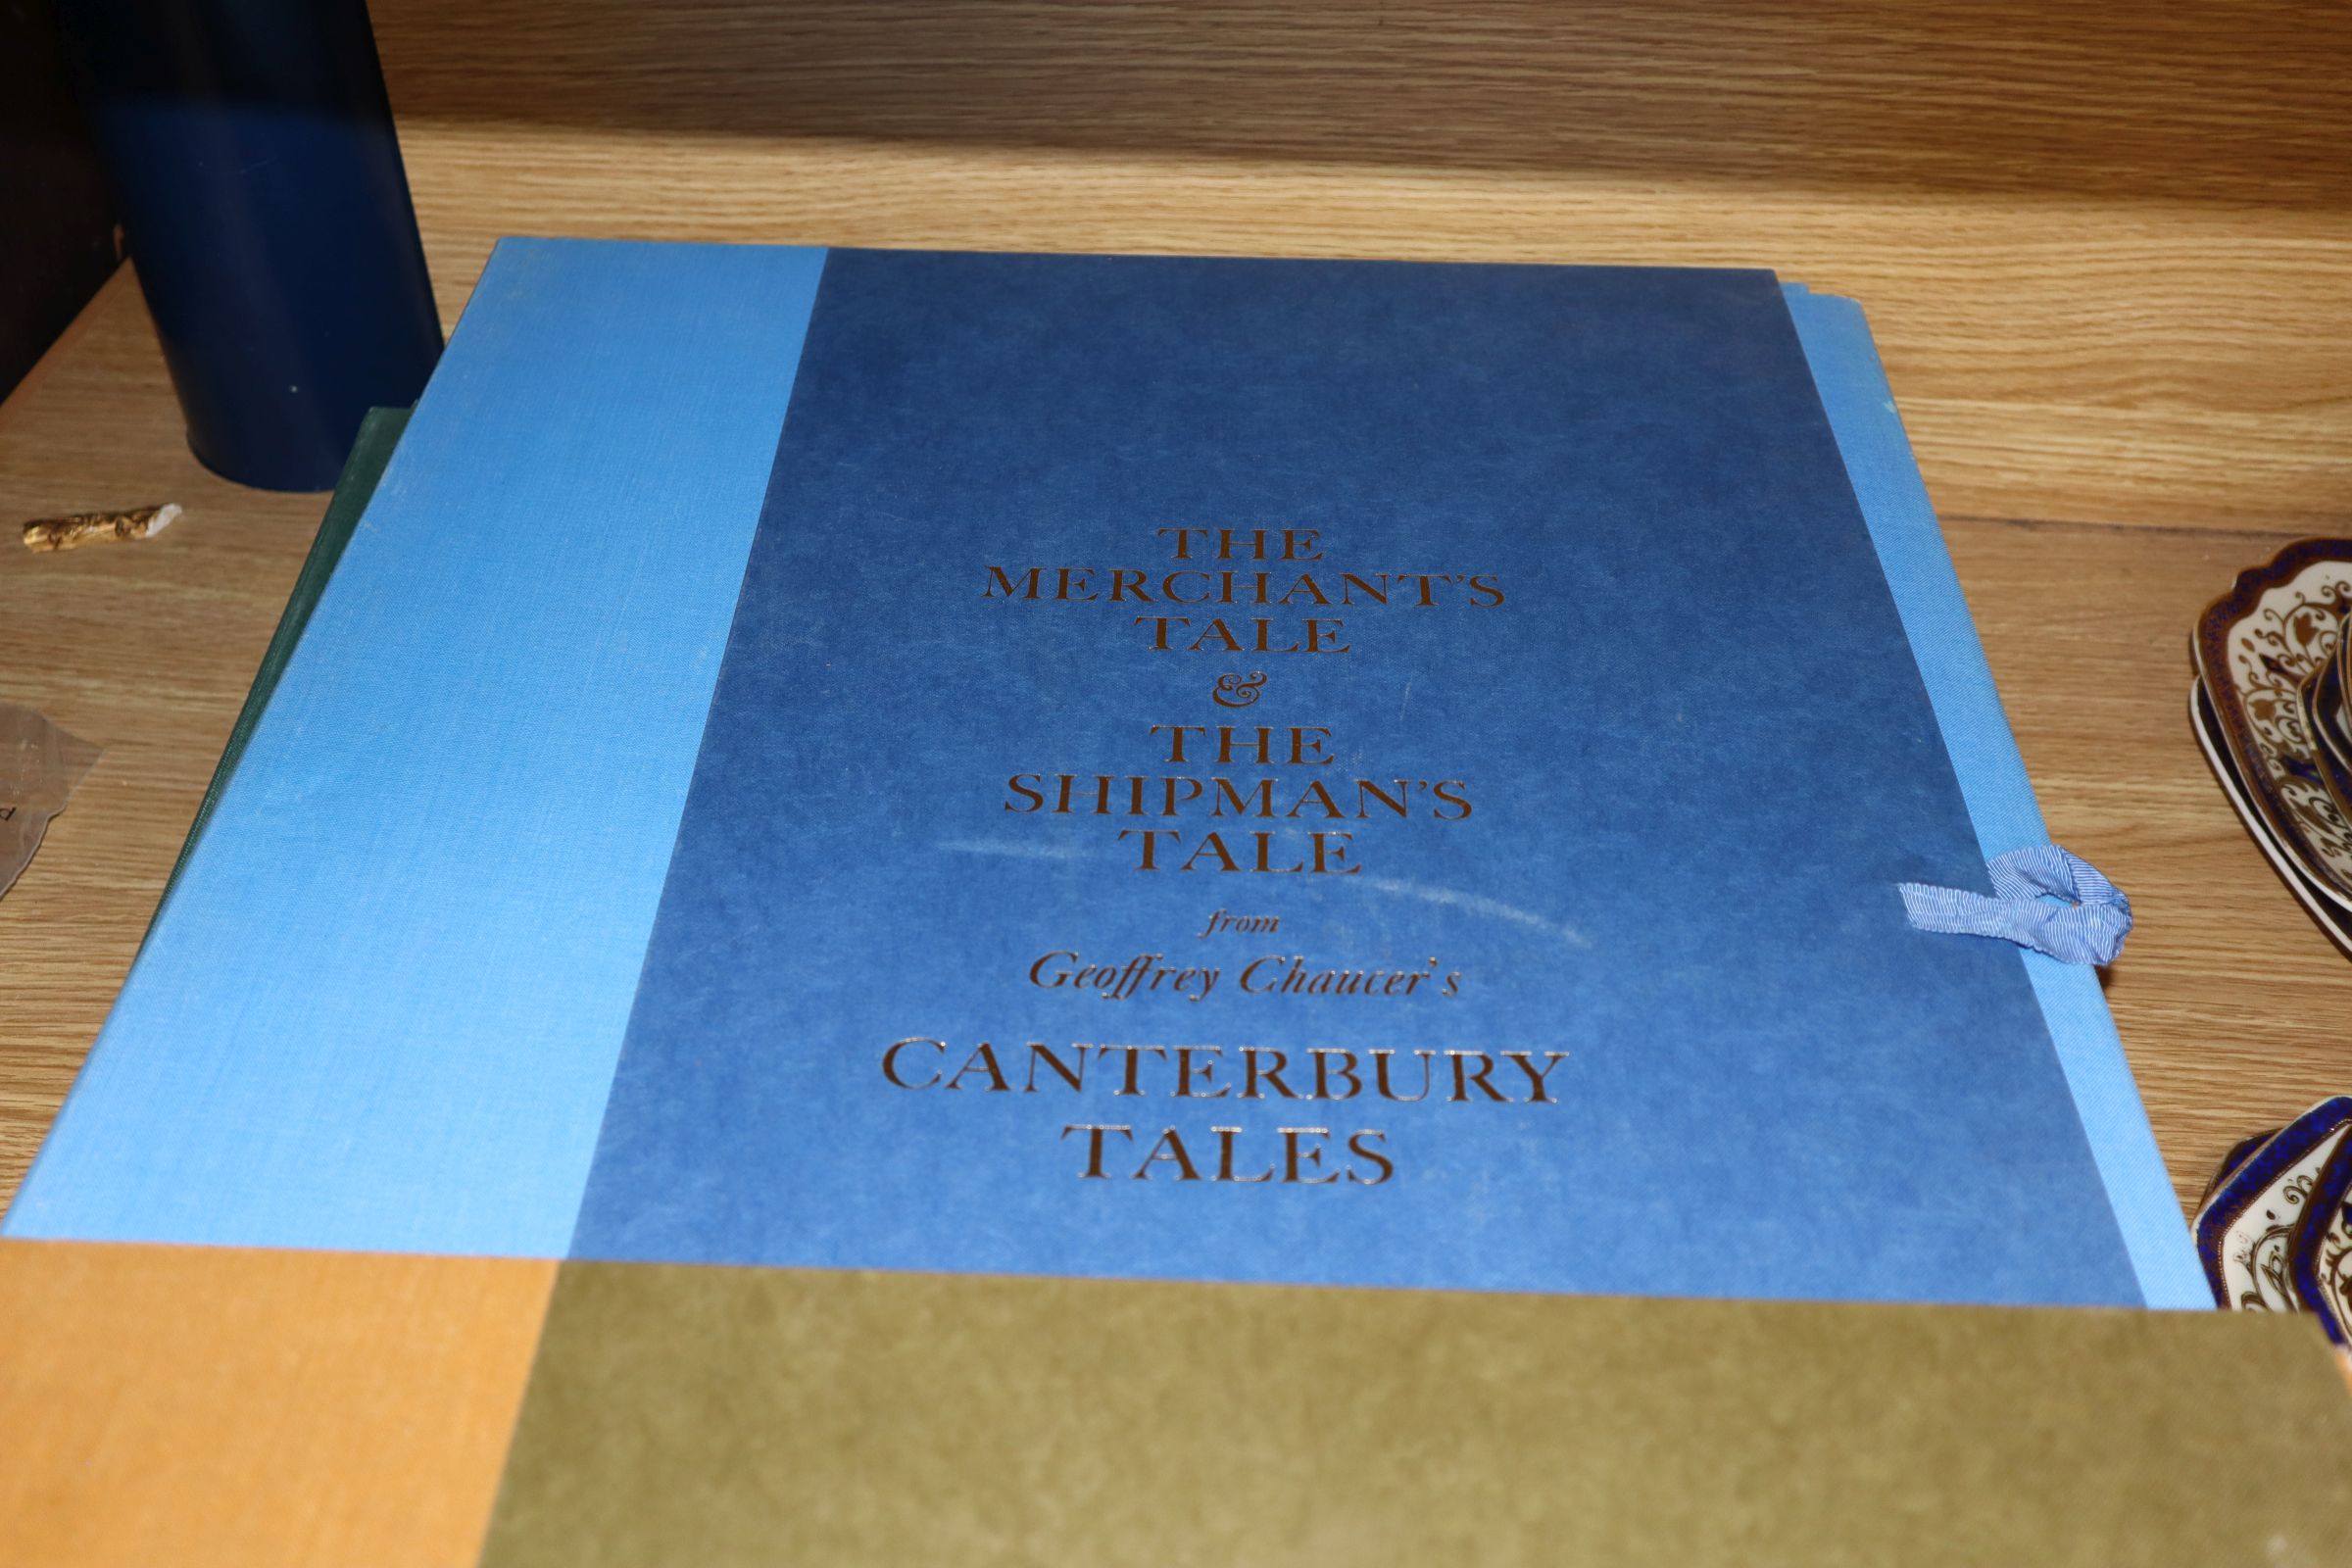 The Canterbury Tales - The Summoner's Tale and The Clerk's Tale, The Merchant's Tale and The - Image 3 of 4